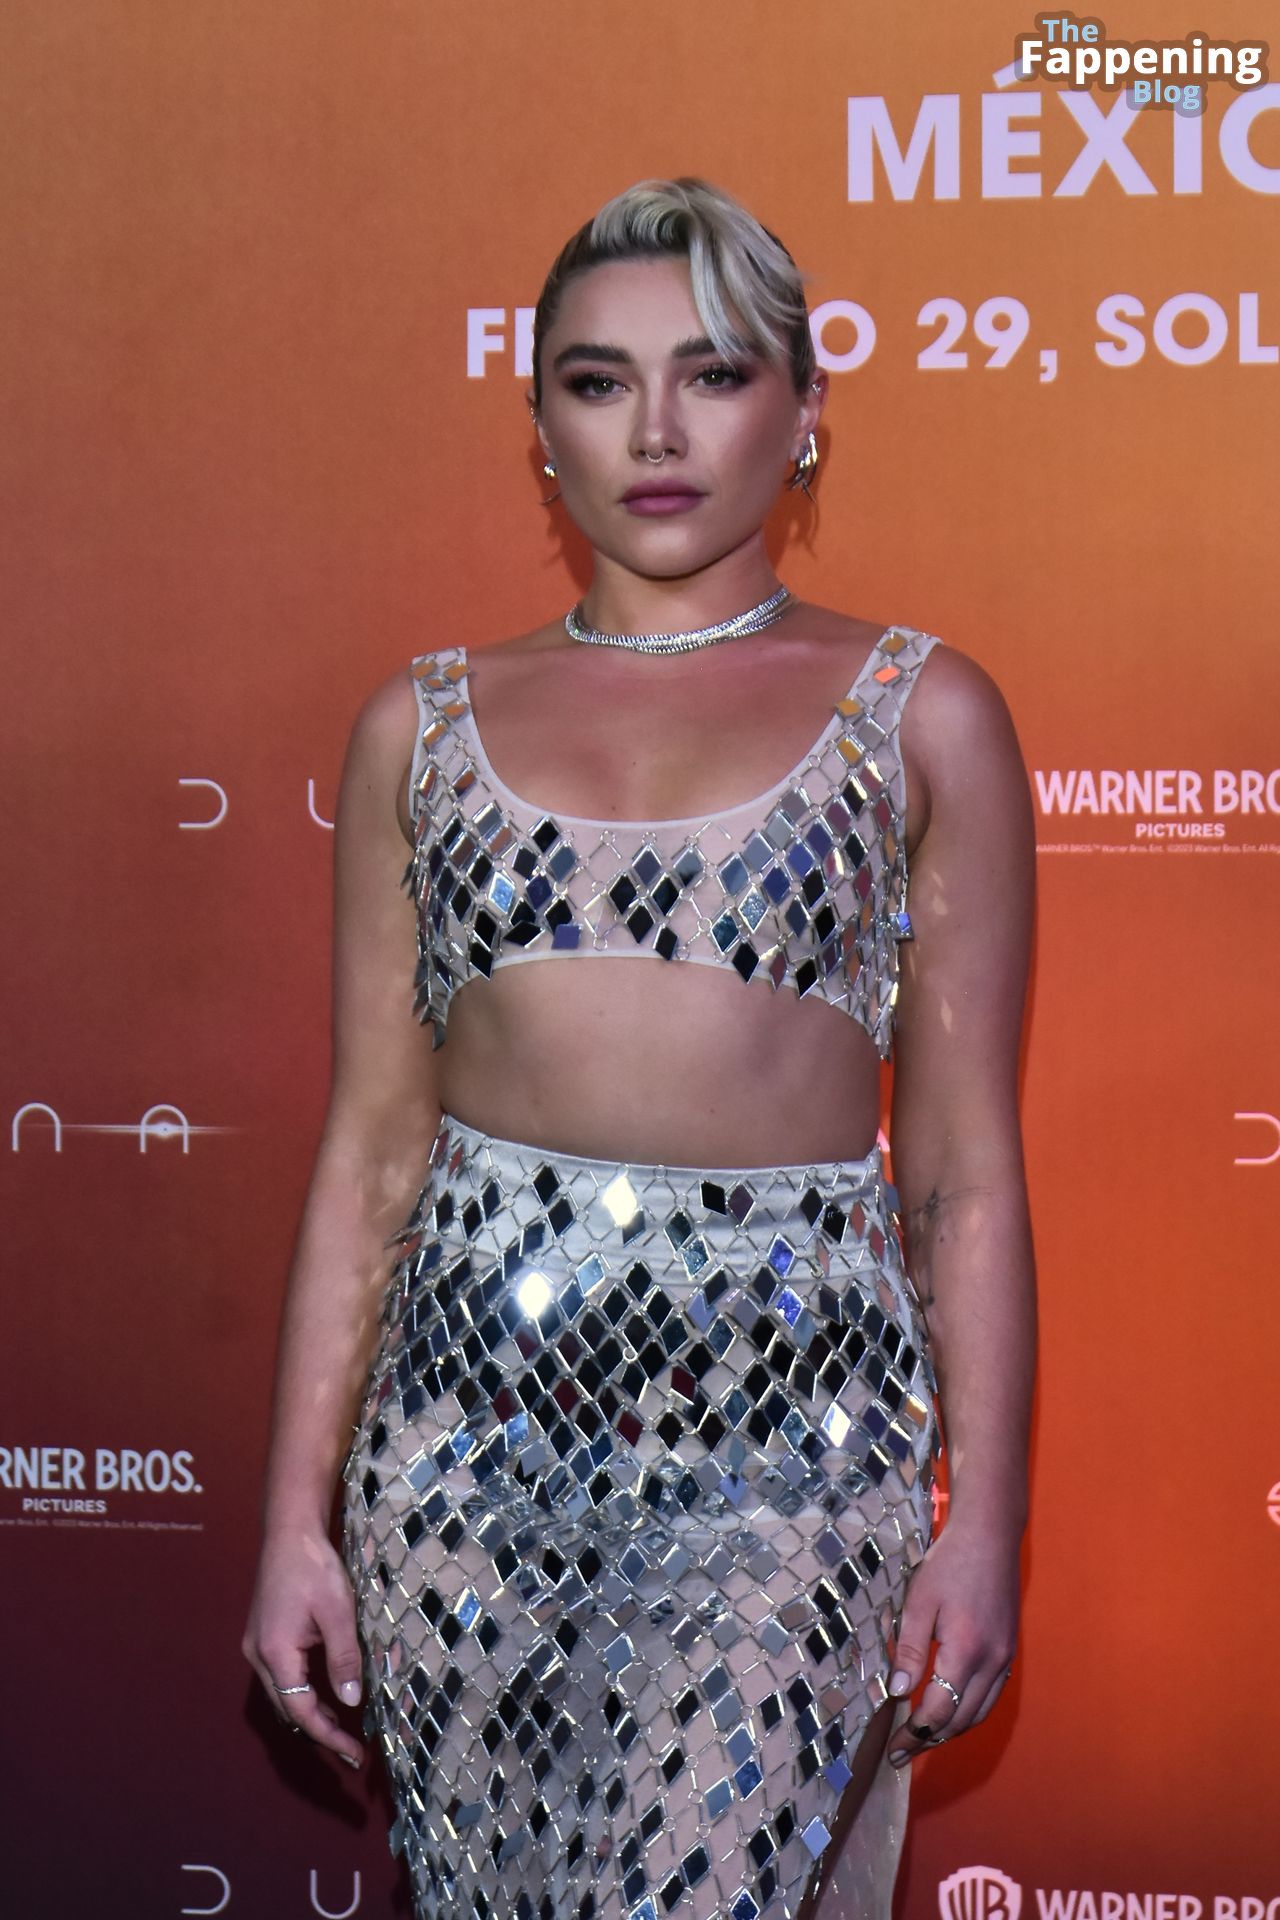 Florence-Pugh-Sexy-22-The-Fappening-Blog.jpg